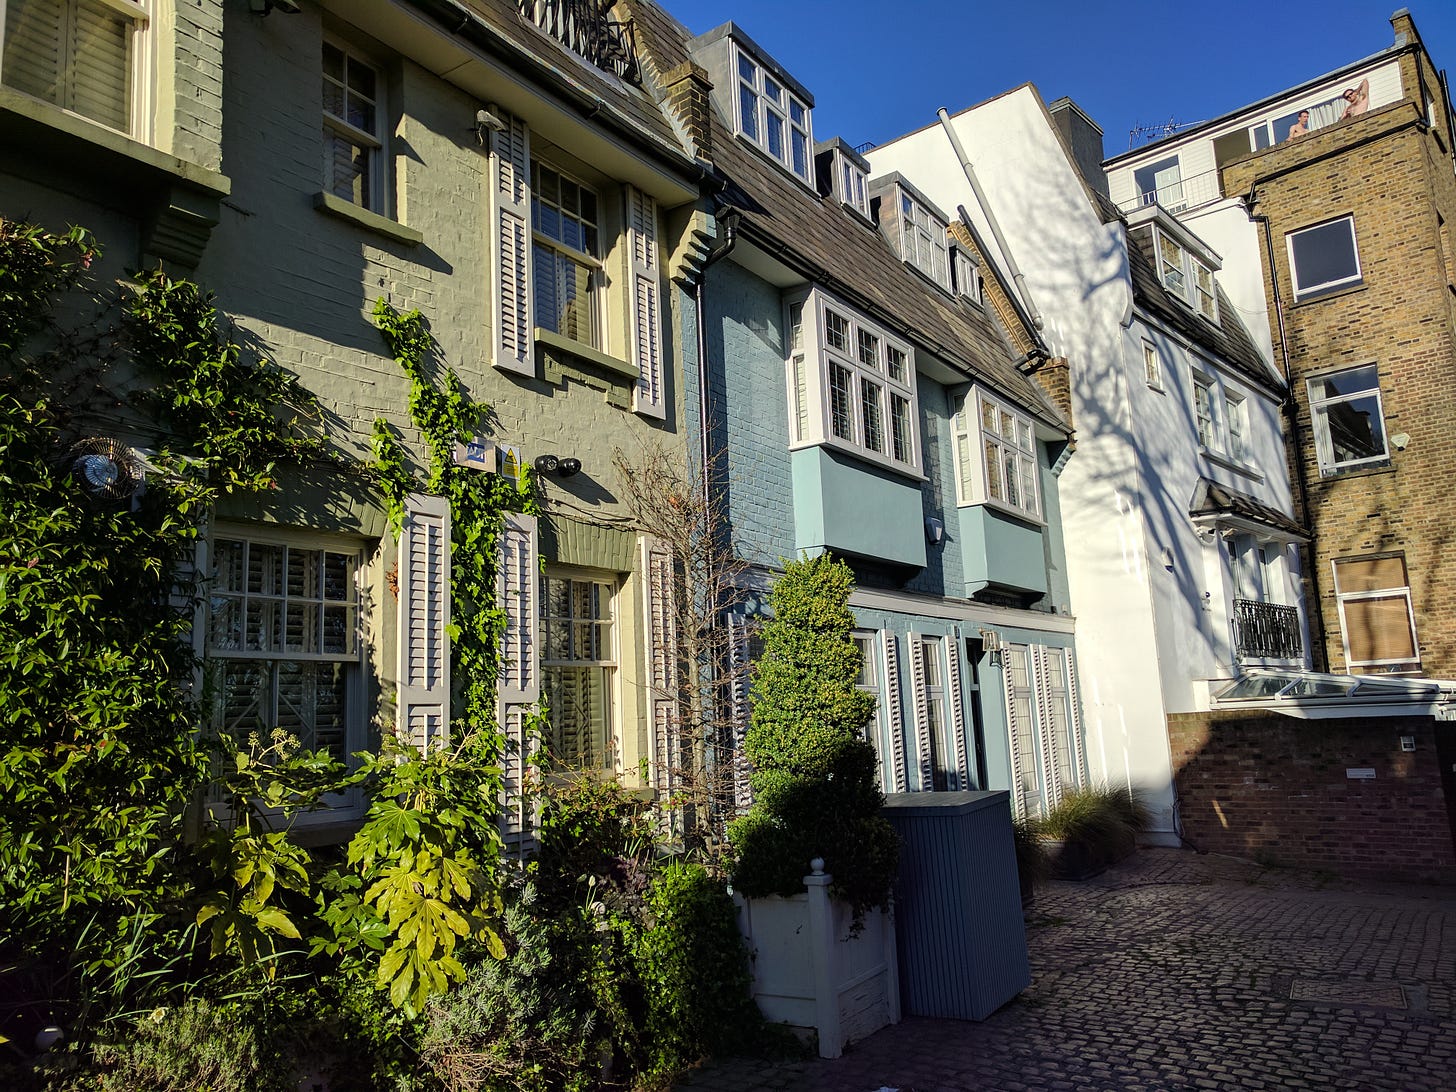 A photo of some pretty houses in a small court in Hampstead London neighbourhood